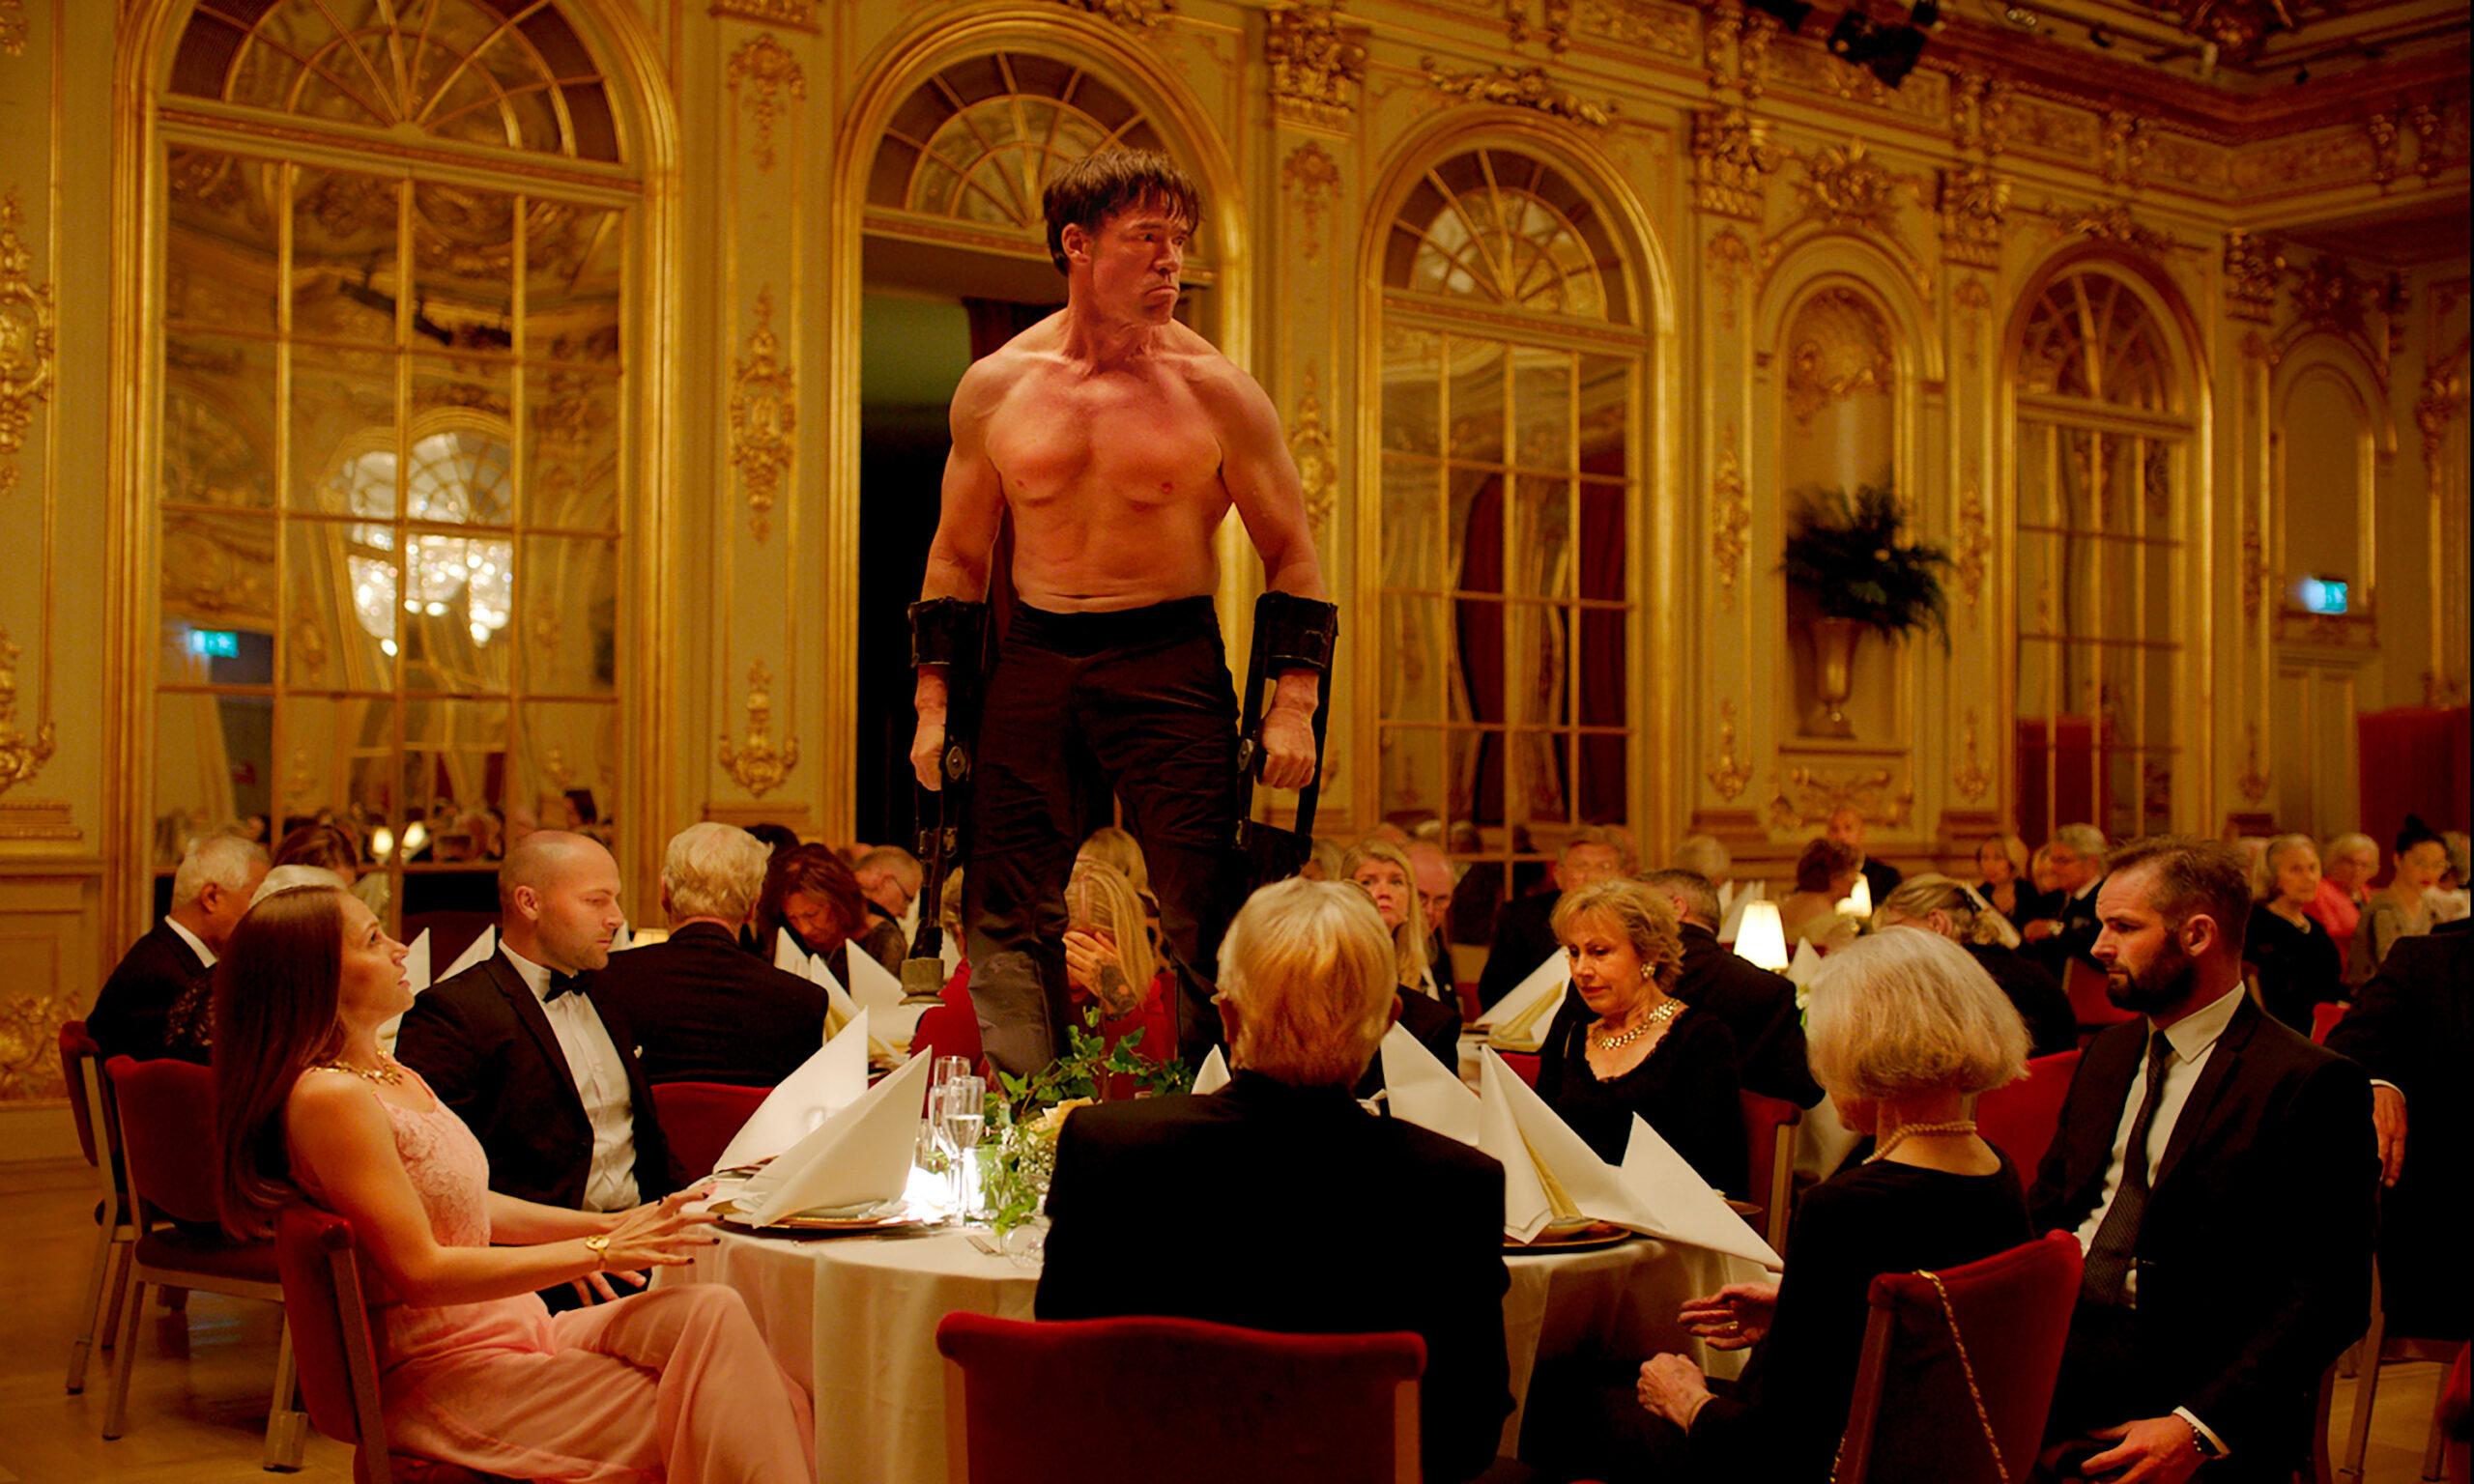 A shot from the Square, by Ruben Östlund. A man stands on a table in a room full of people seated at tables.